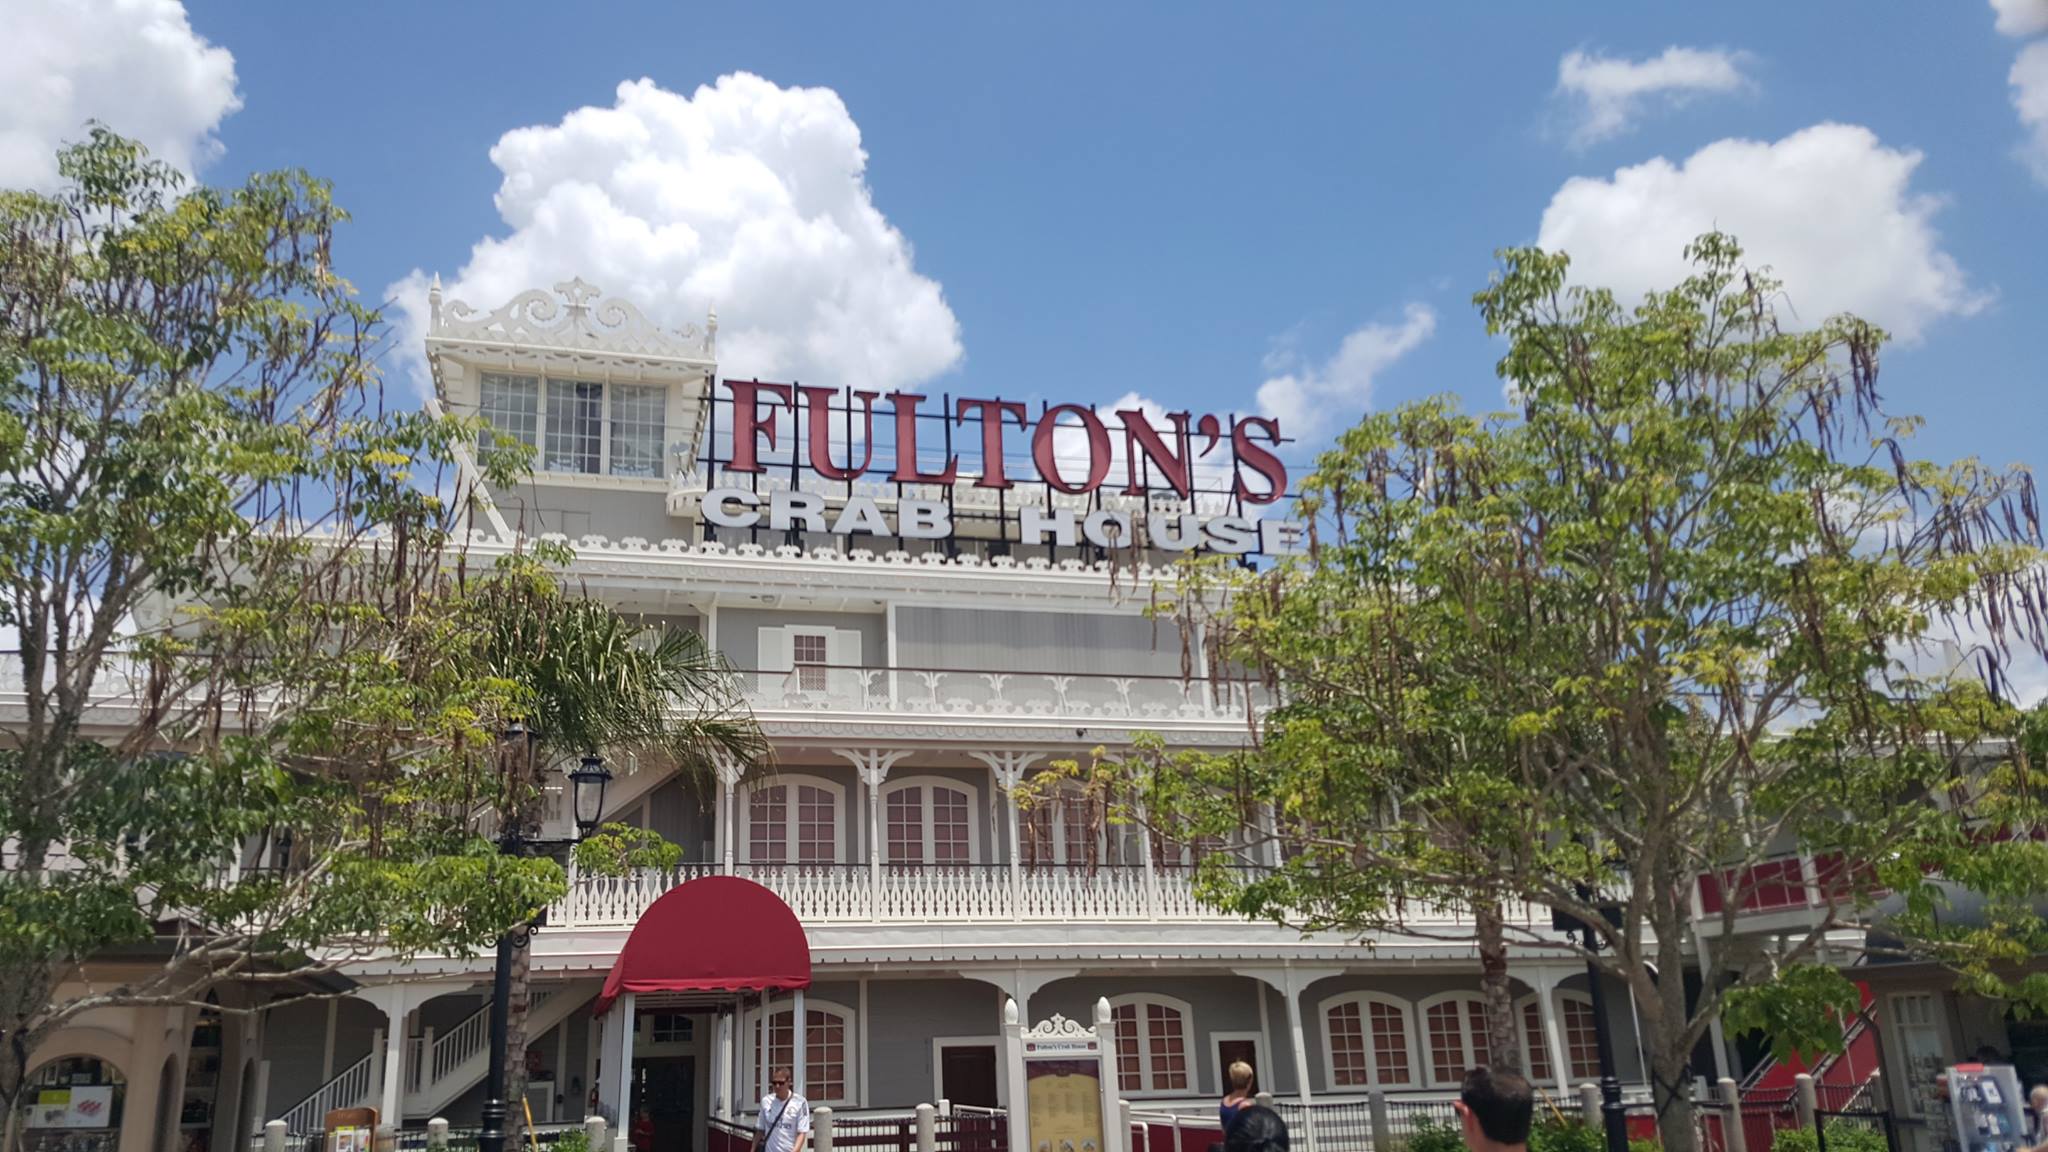 Celebrate the Epcot Food & Wine Festival at Fulton’s Crab House